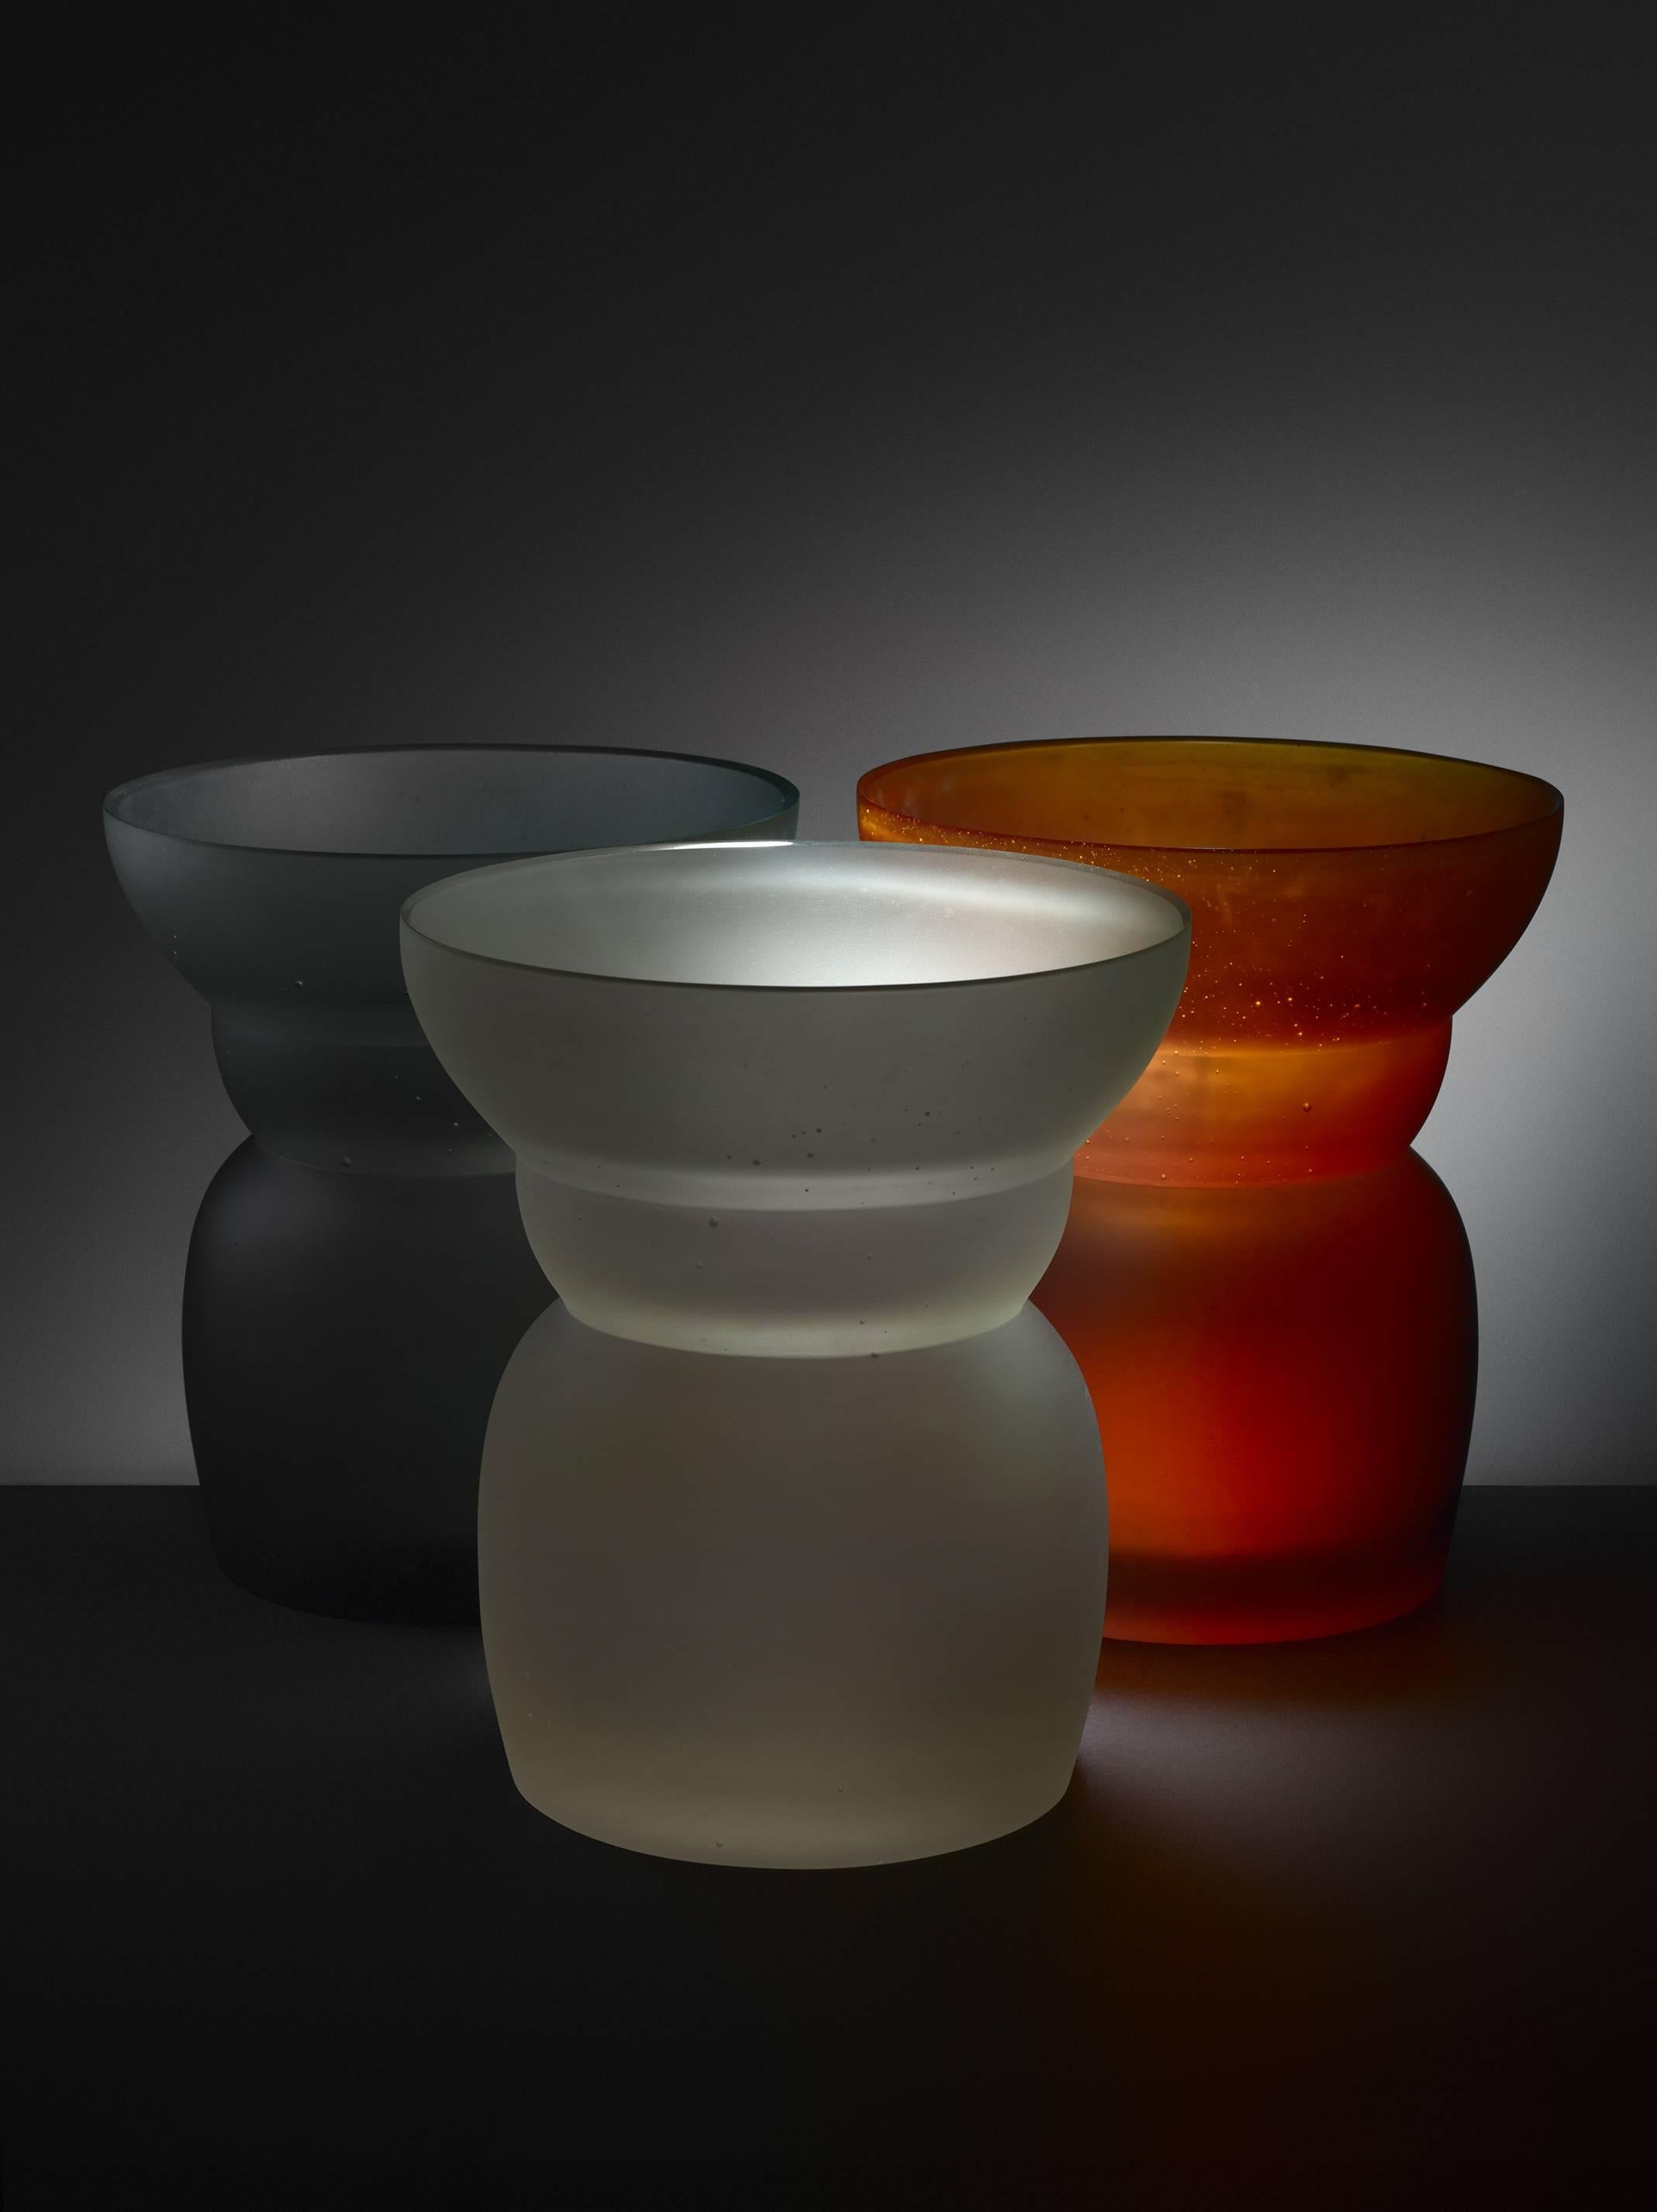 The Particles Gallery Collection.

Vessel, 2010.
by Marieke Schoonderbeek

‘I connect with a specific location and create an object which communicates its space - of the journey, the place itself and what actually happens.’
A glass vessel, created